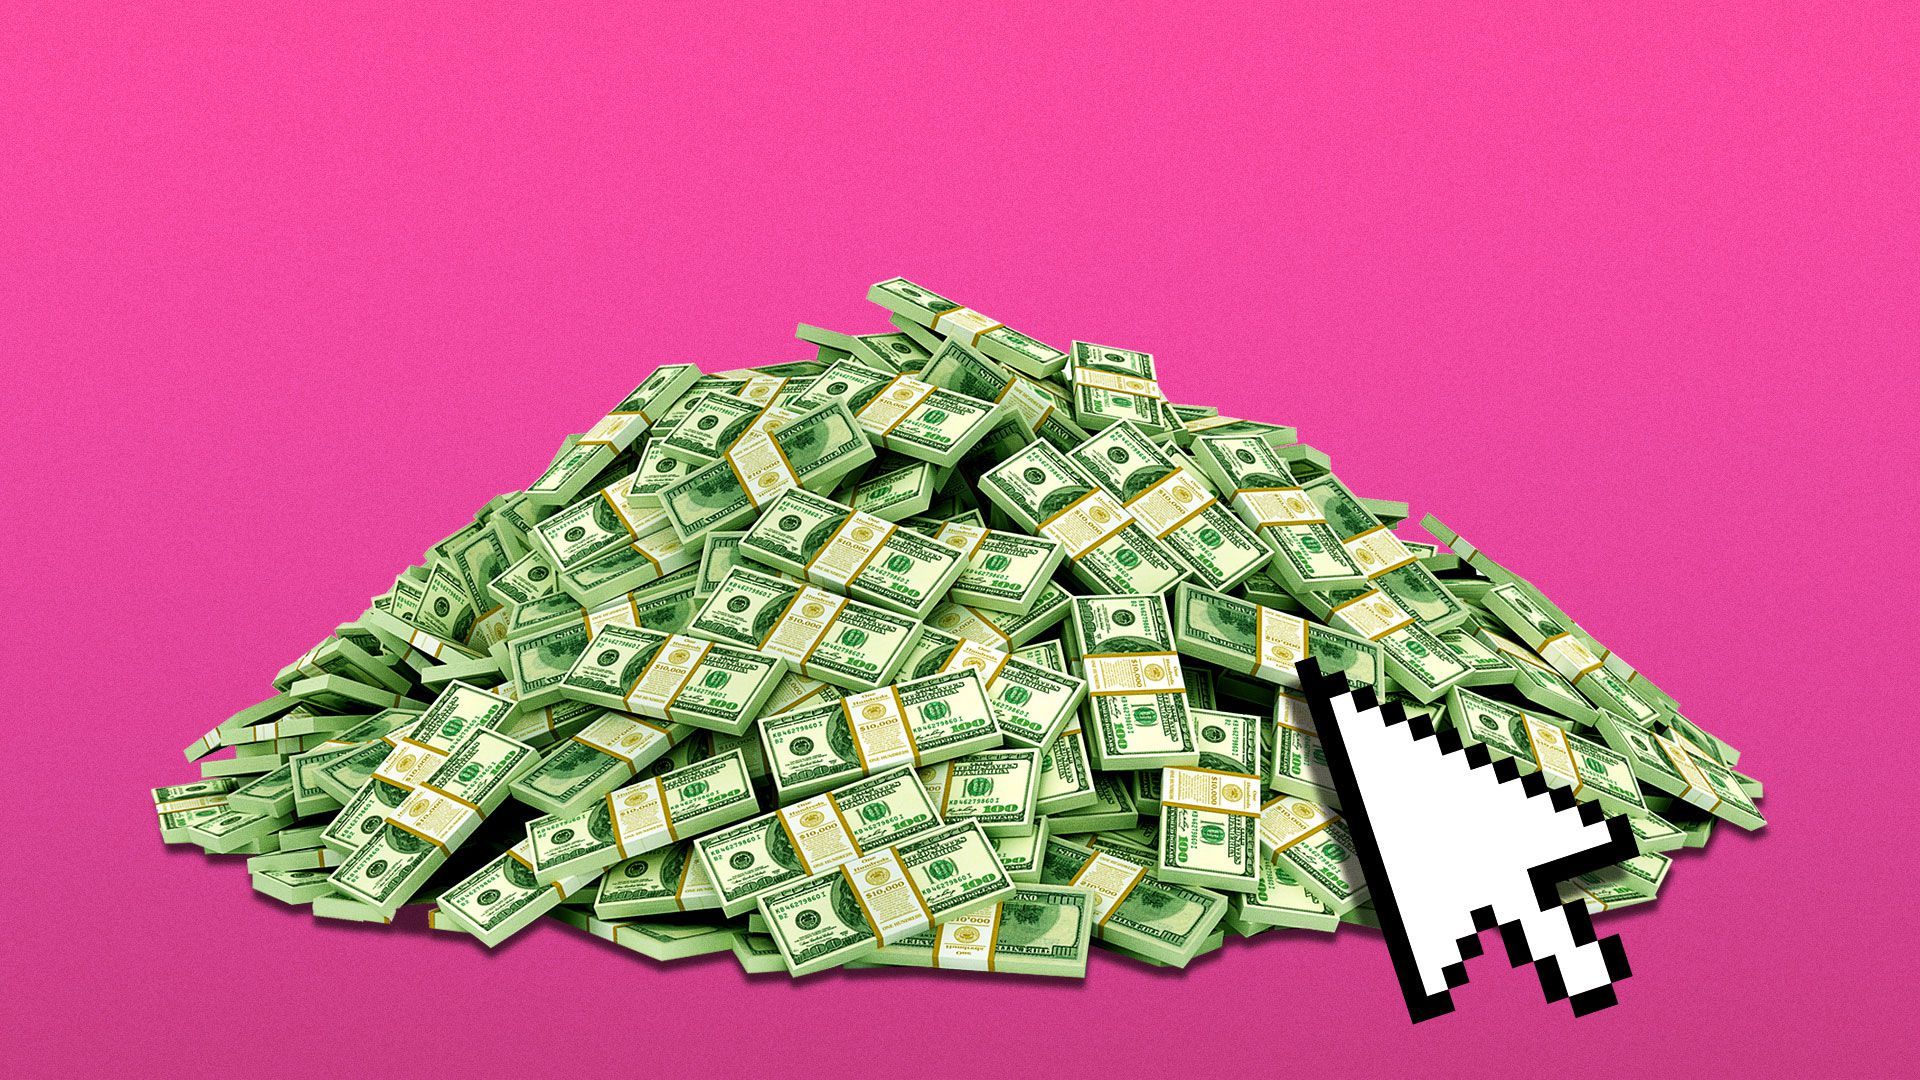 Illustration of pile of money with hovering cursor